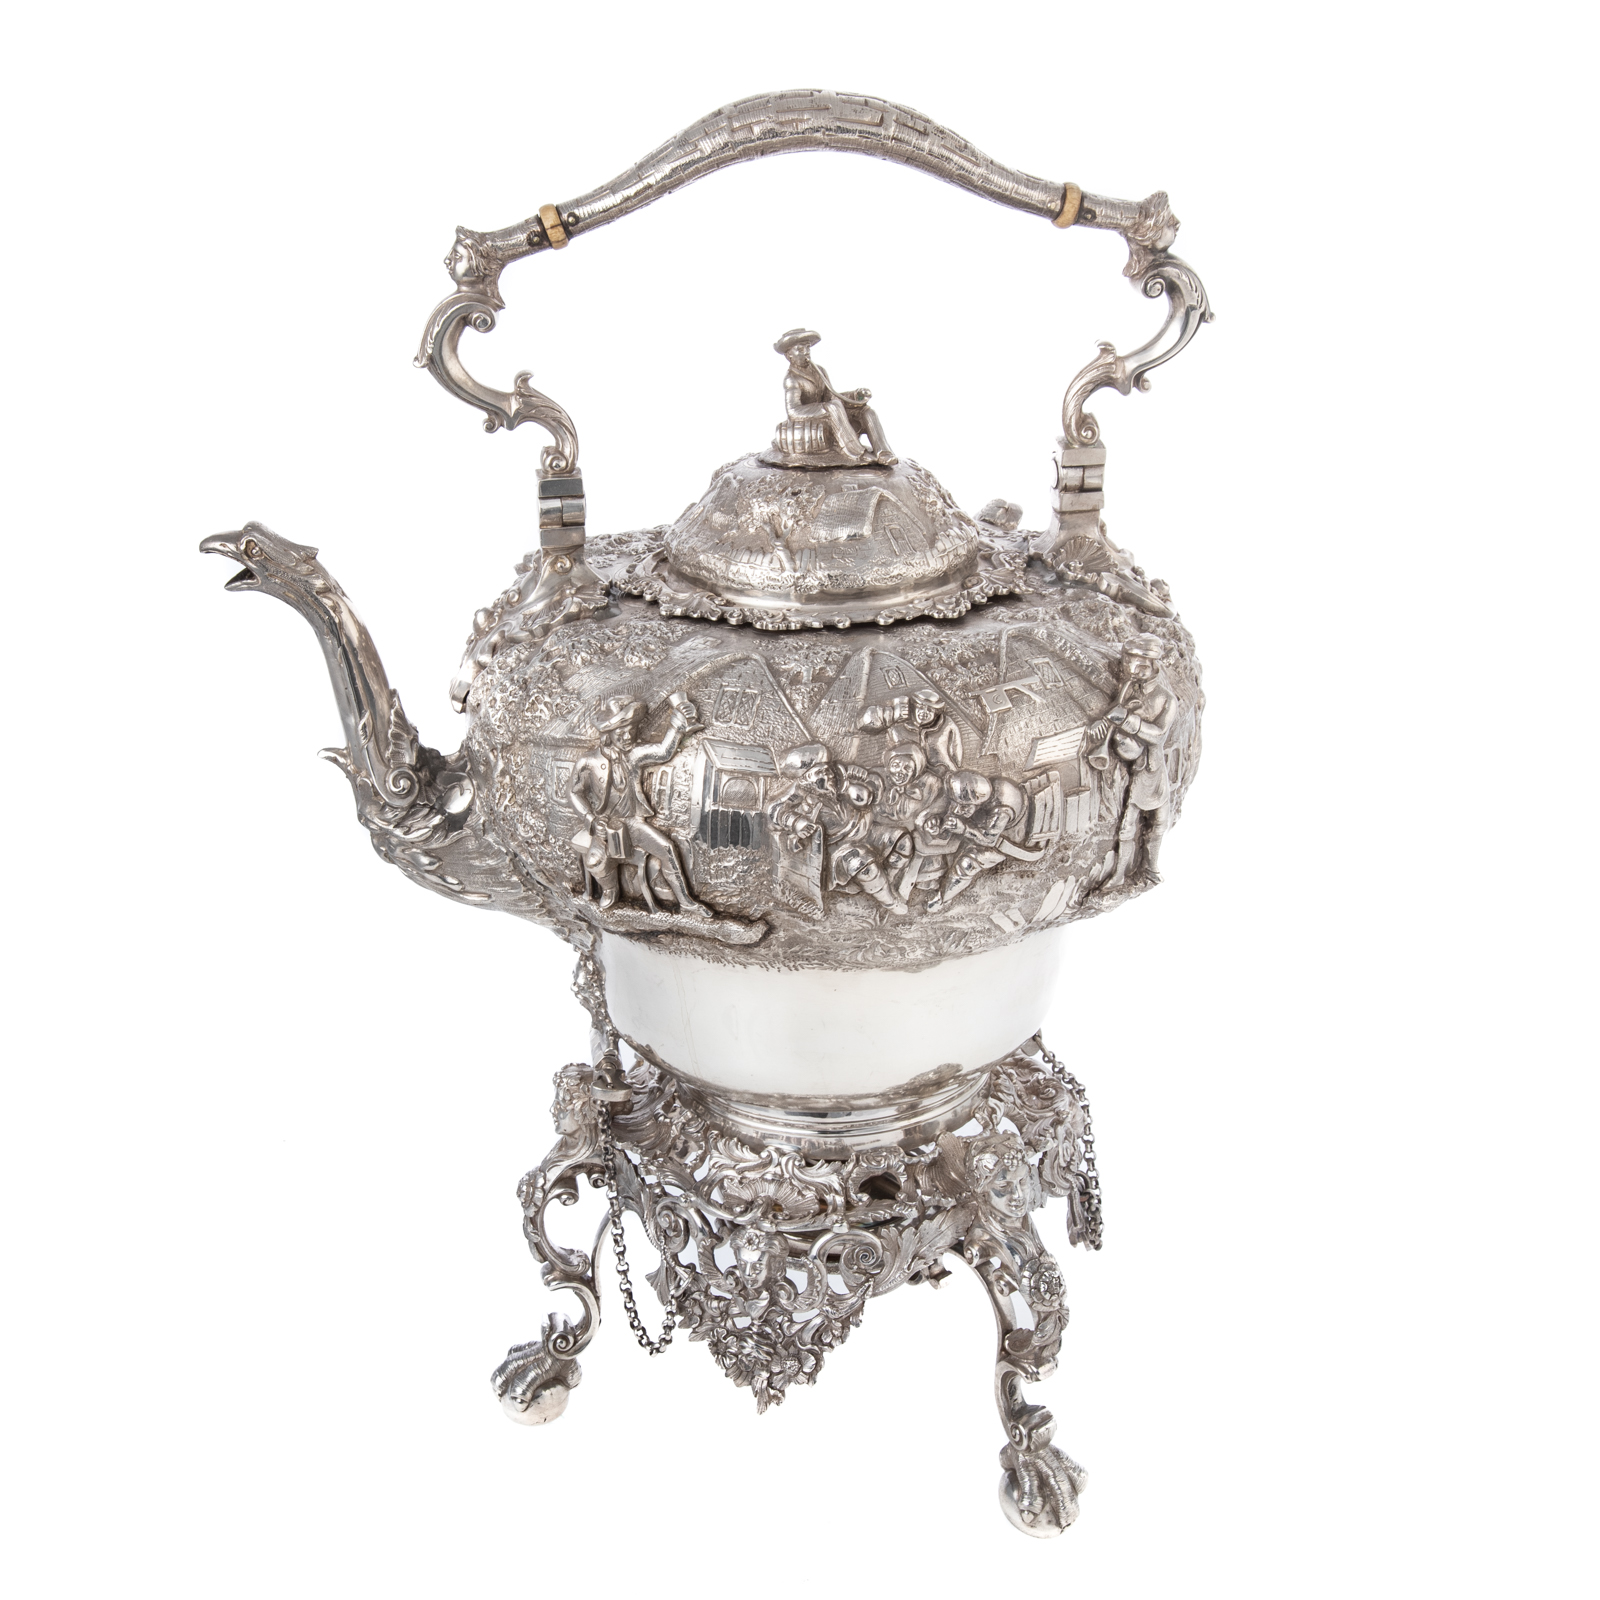 IMPRESSIVE VICTORIAN REPOUSSE KETTLE ON STAND 287997